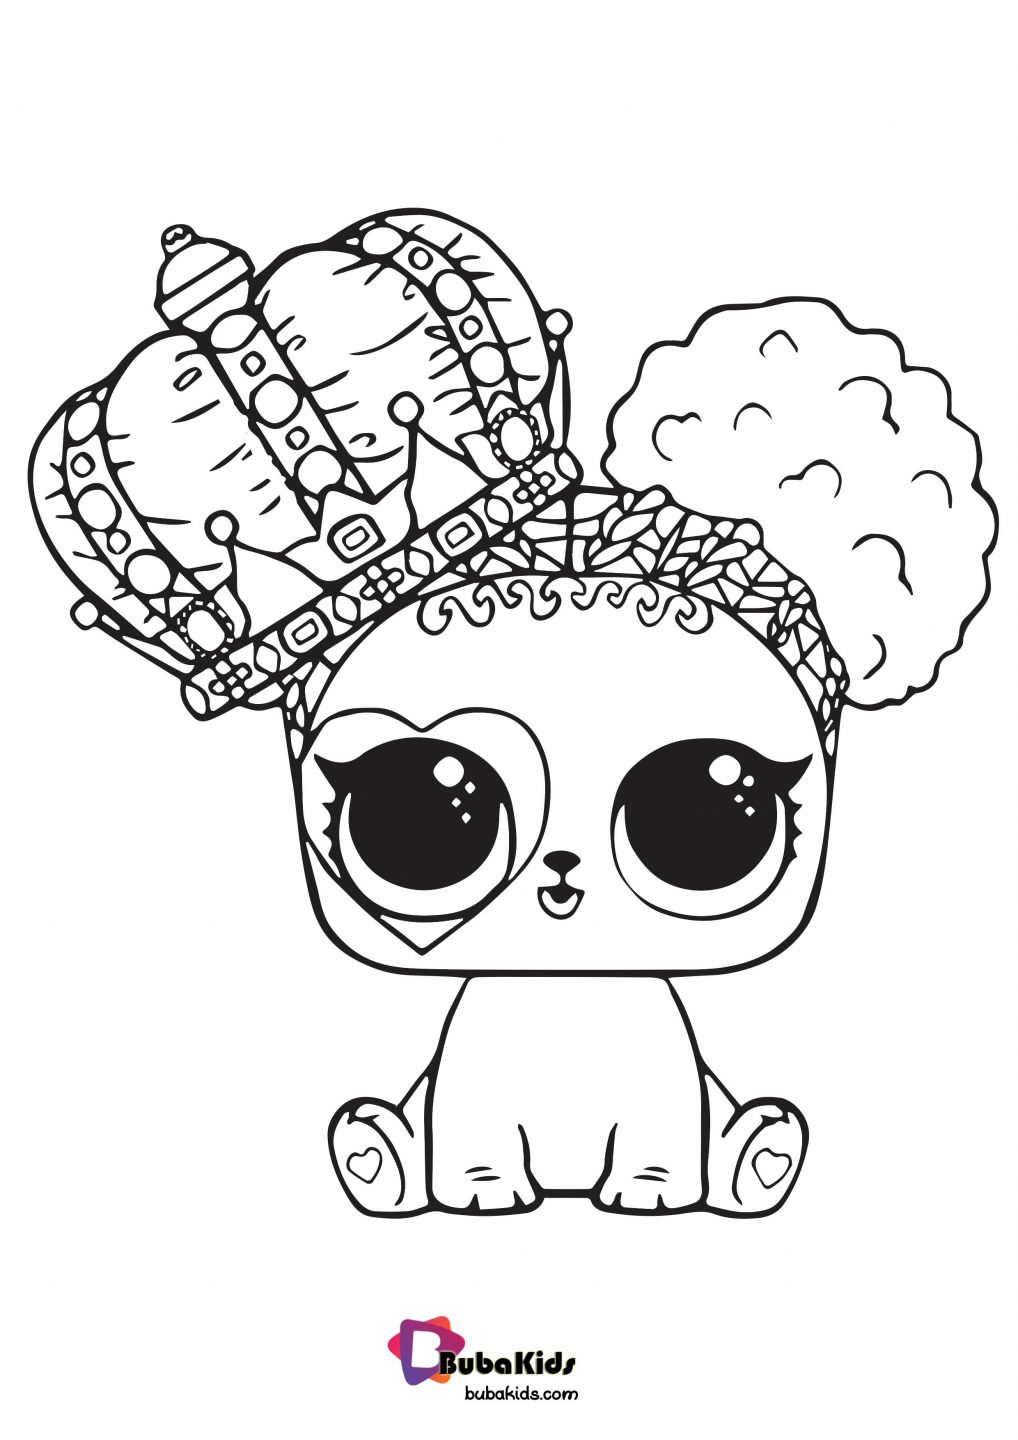 cute lol pet coloring page for girls in hd resolution